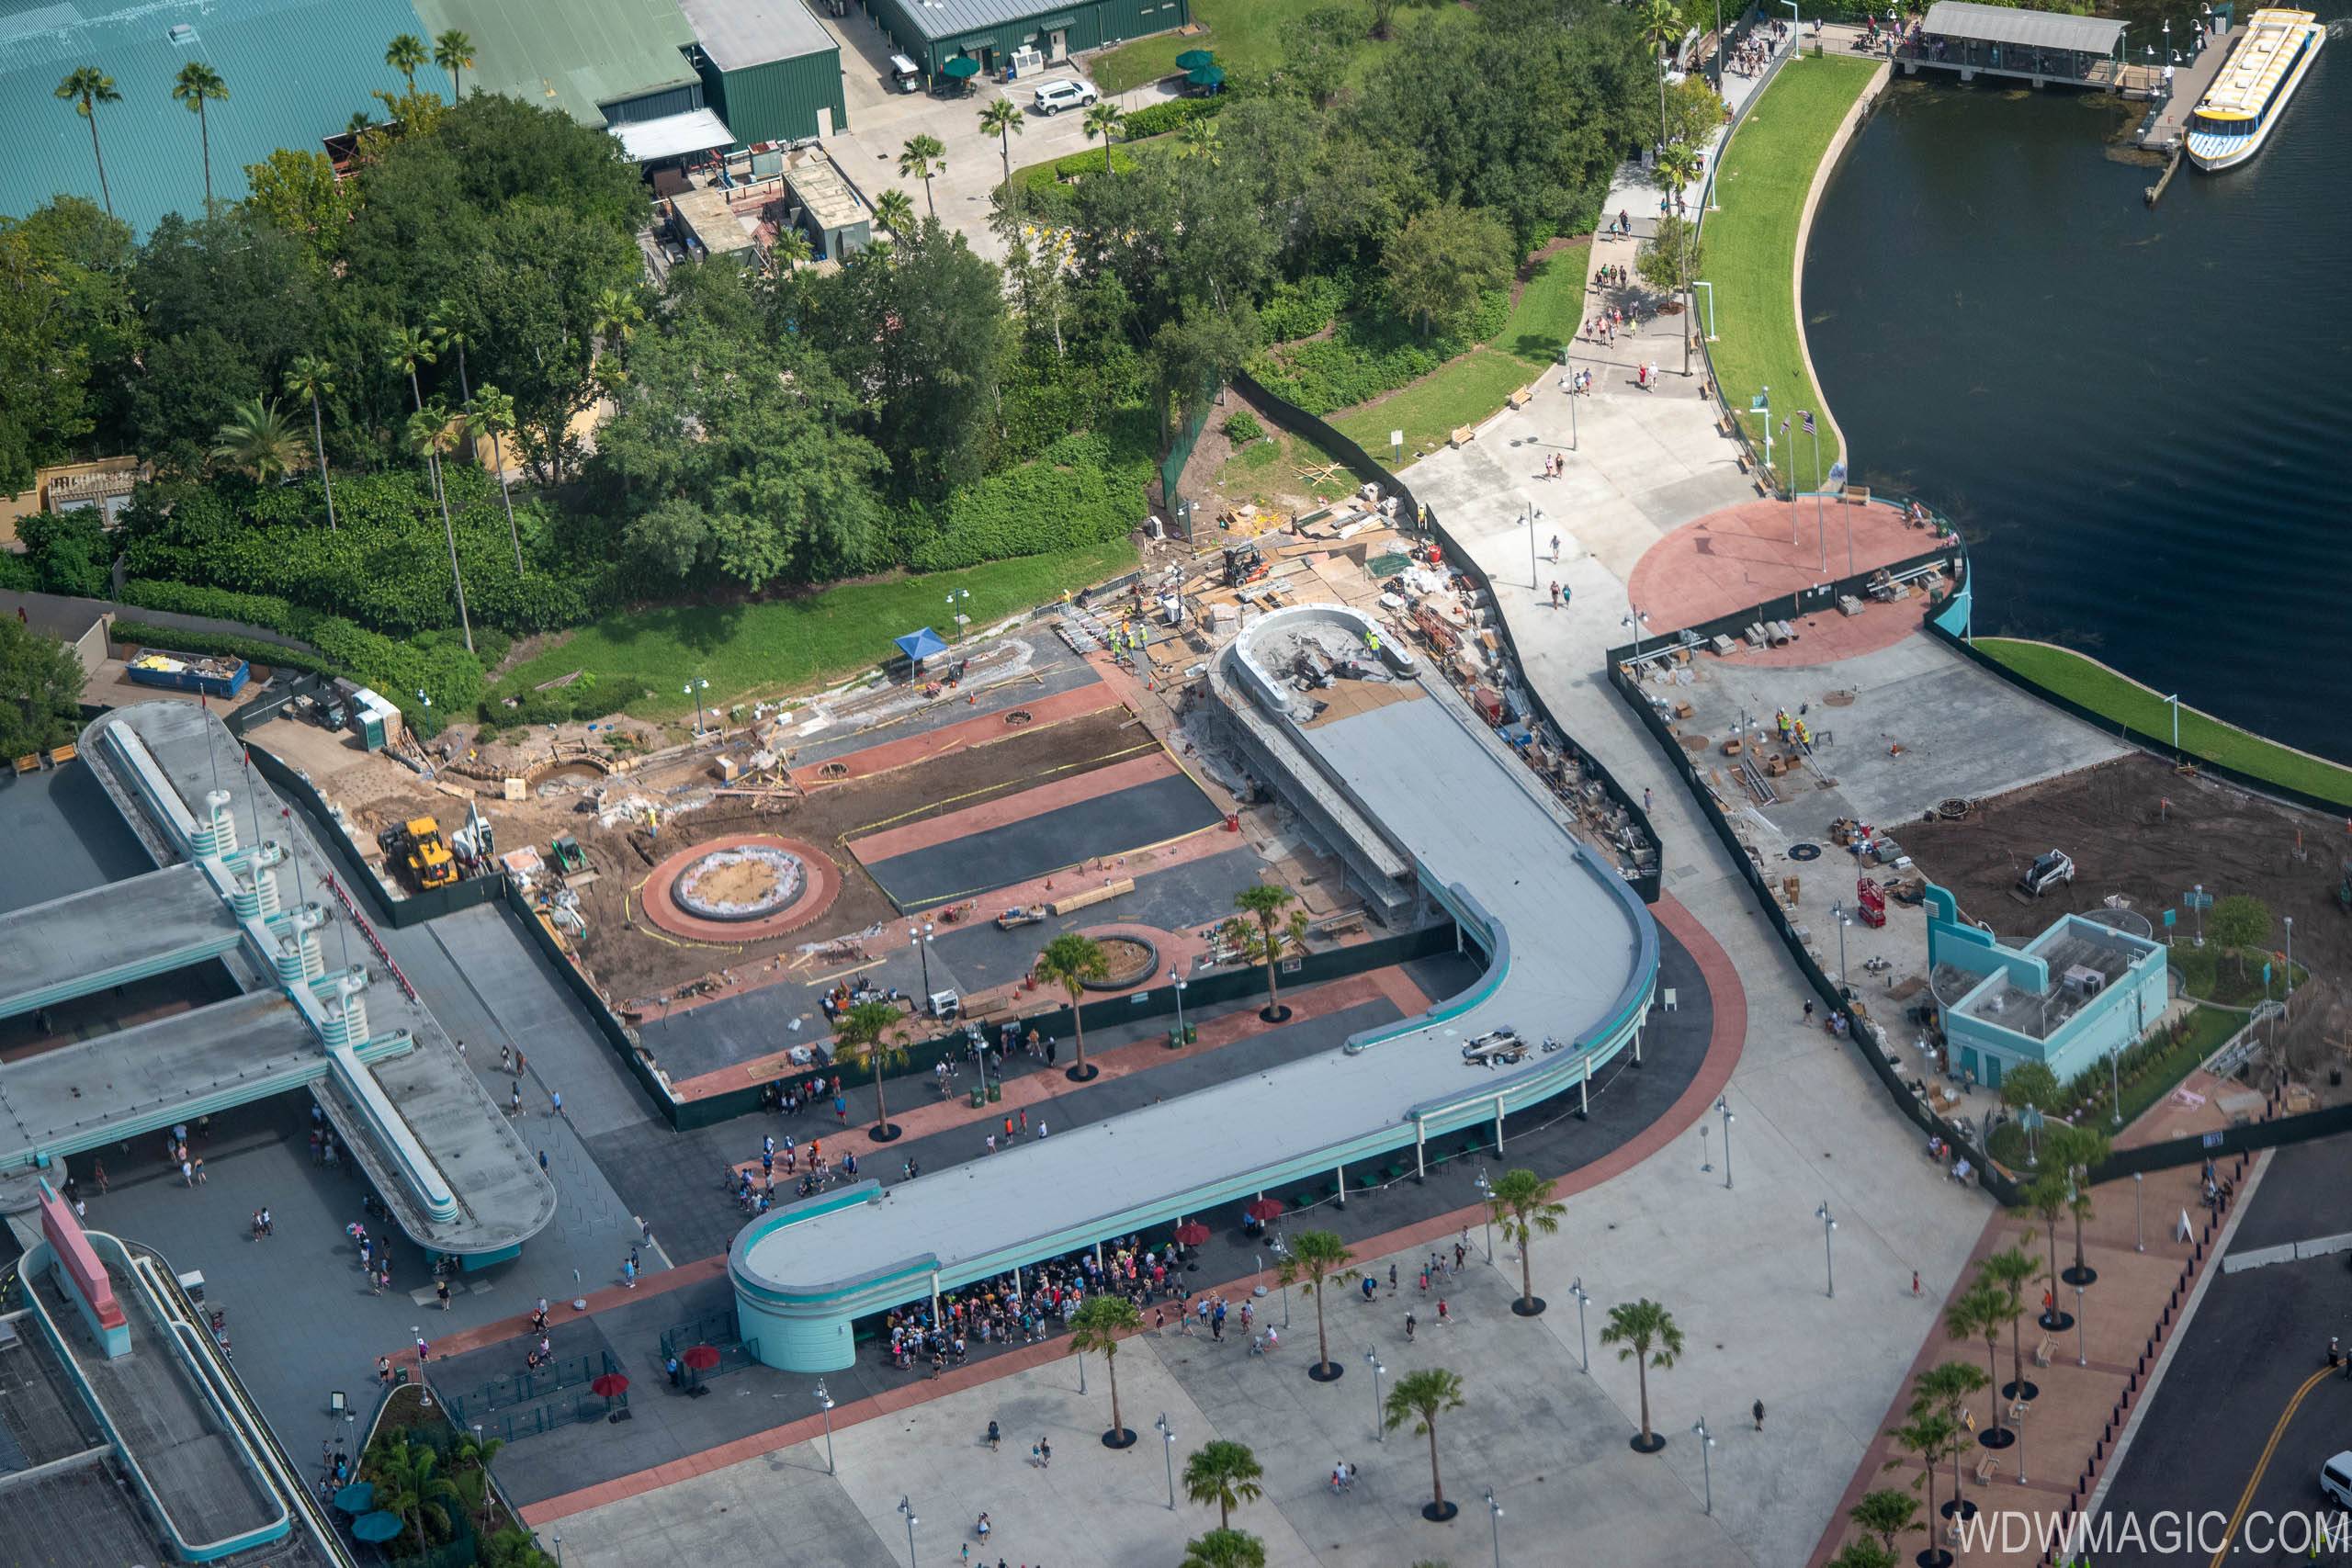 Disney's Hollywood Studios main entrance construction from the air - July 2019